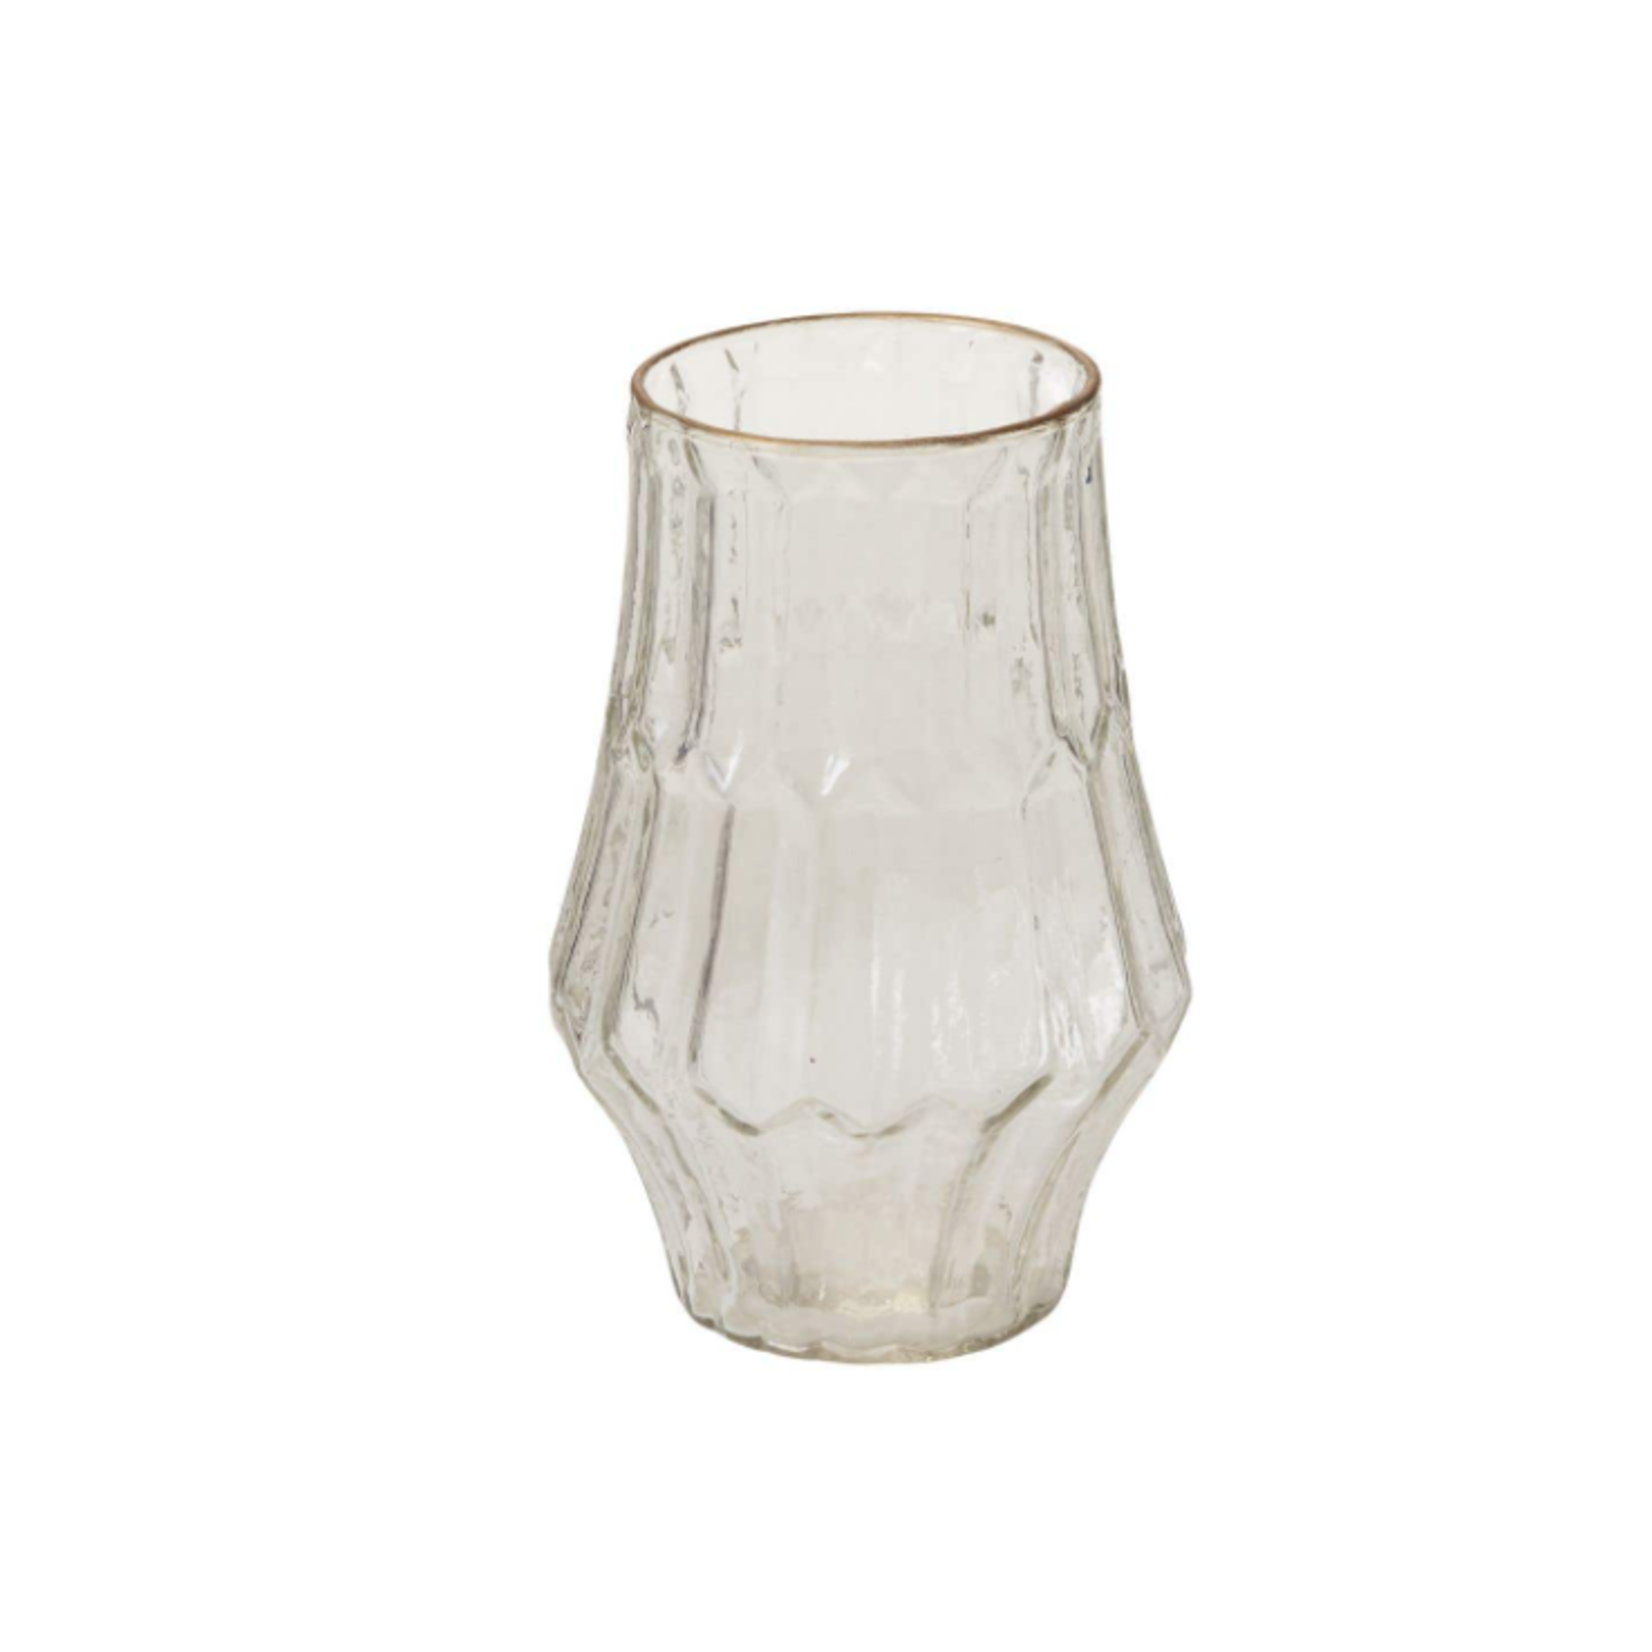 6.75”H X 4.5” CLEAR GLASS KATHERINE VOTIVE WITH GOLD LIP